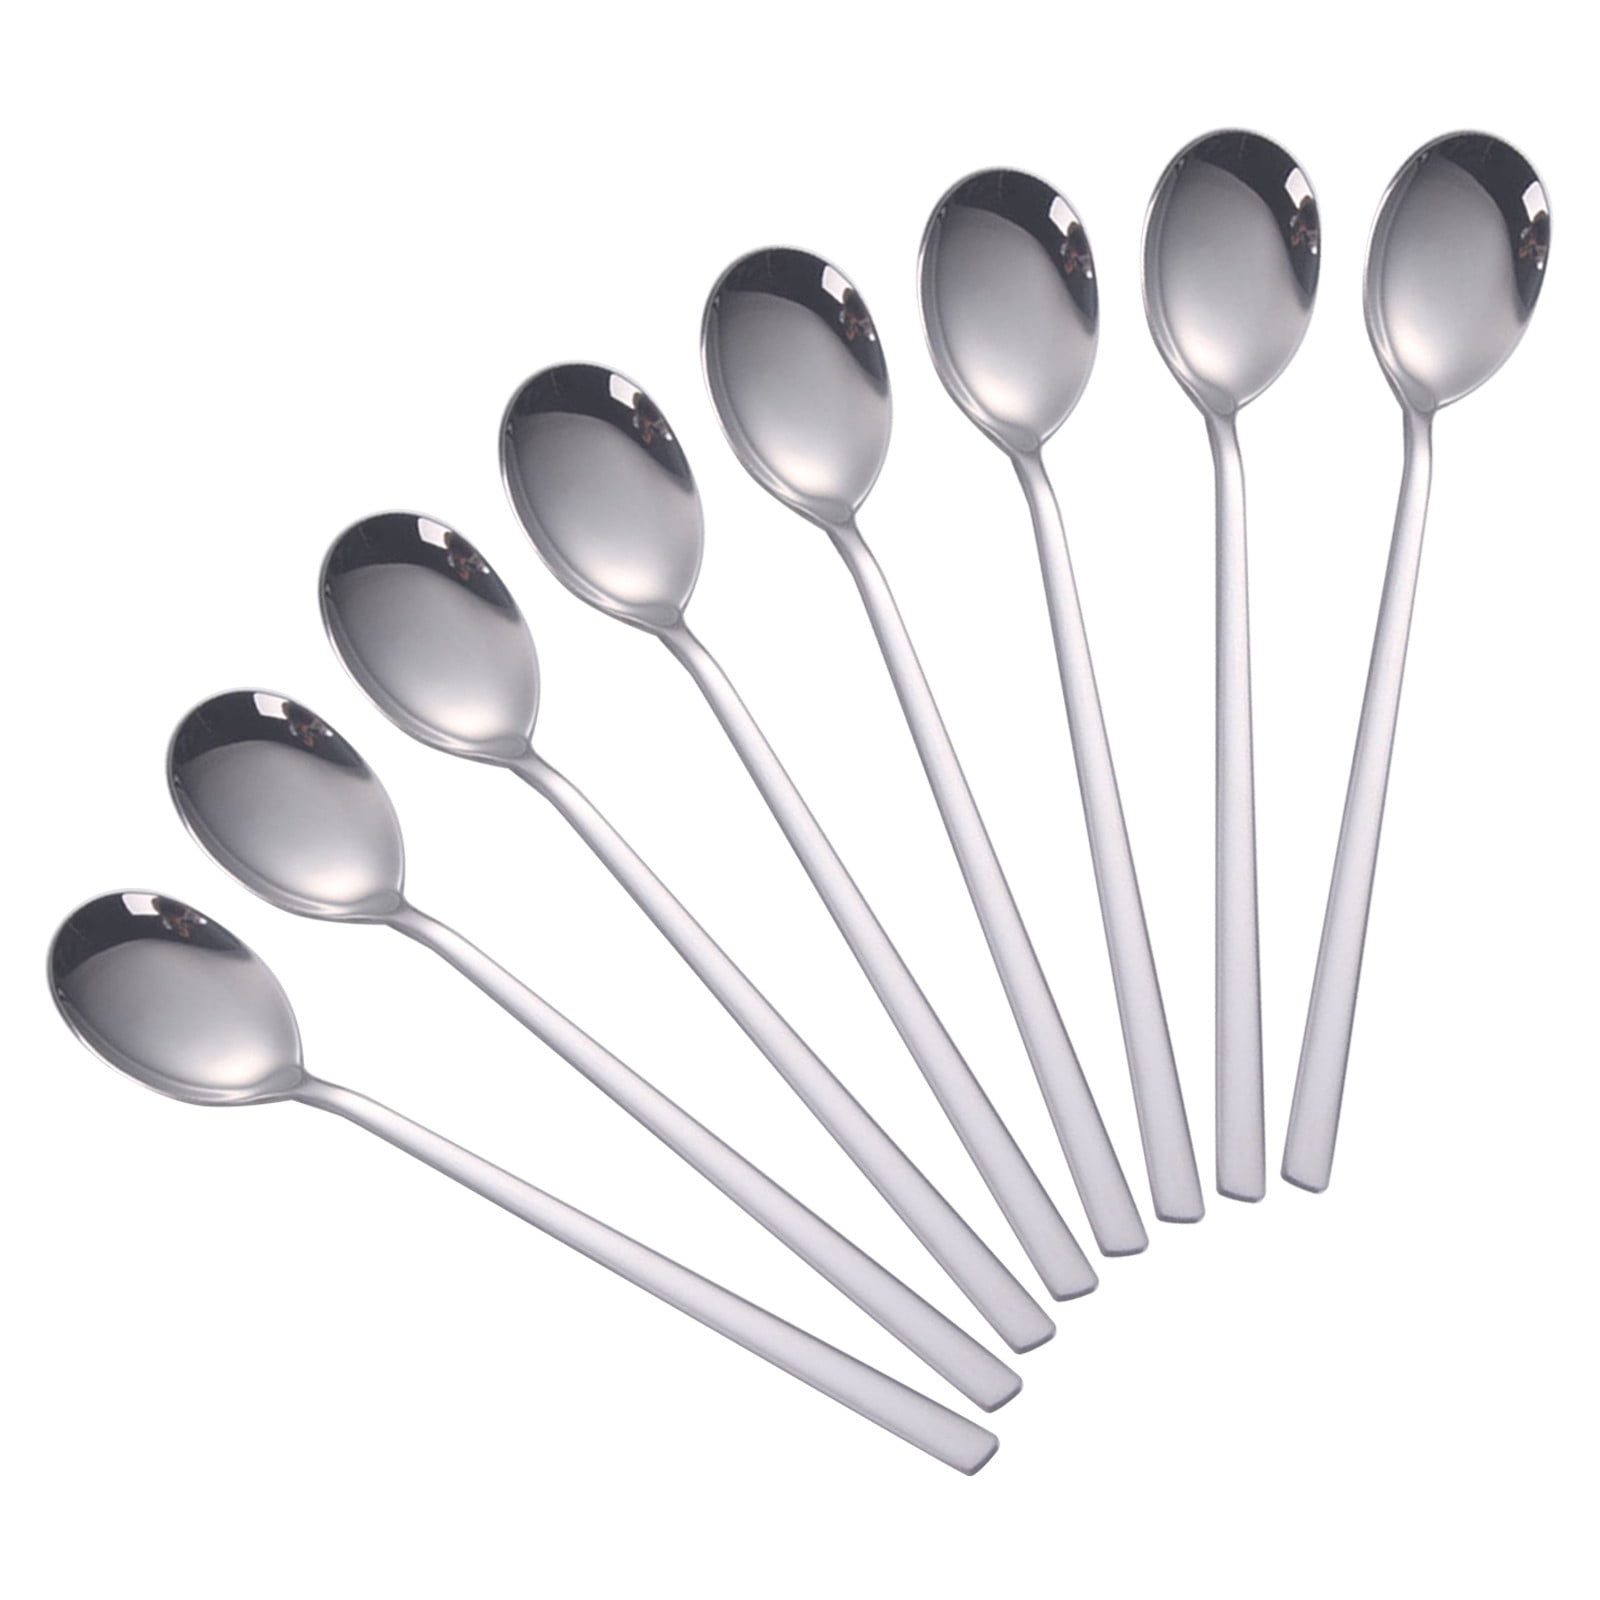 6PCS Heavy Duty Stainless Steel Table Spoons Set Kitchen Cutlery Utensils 8 Inch